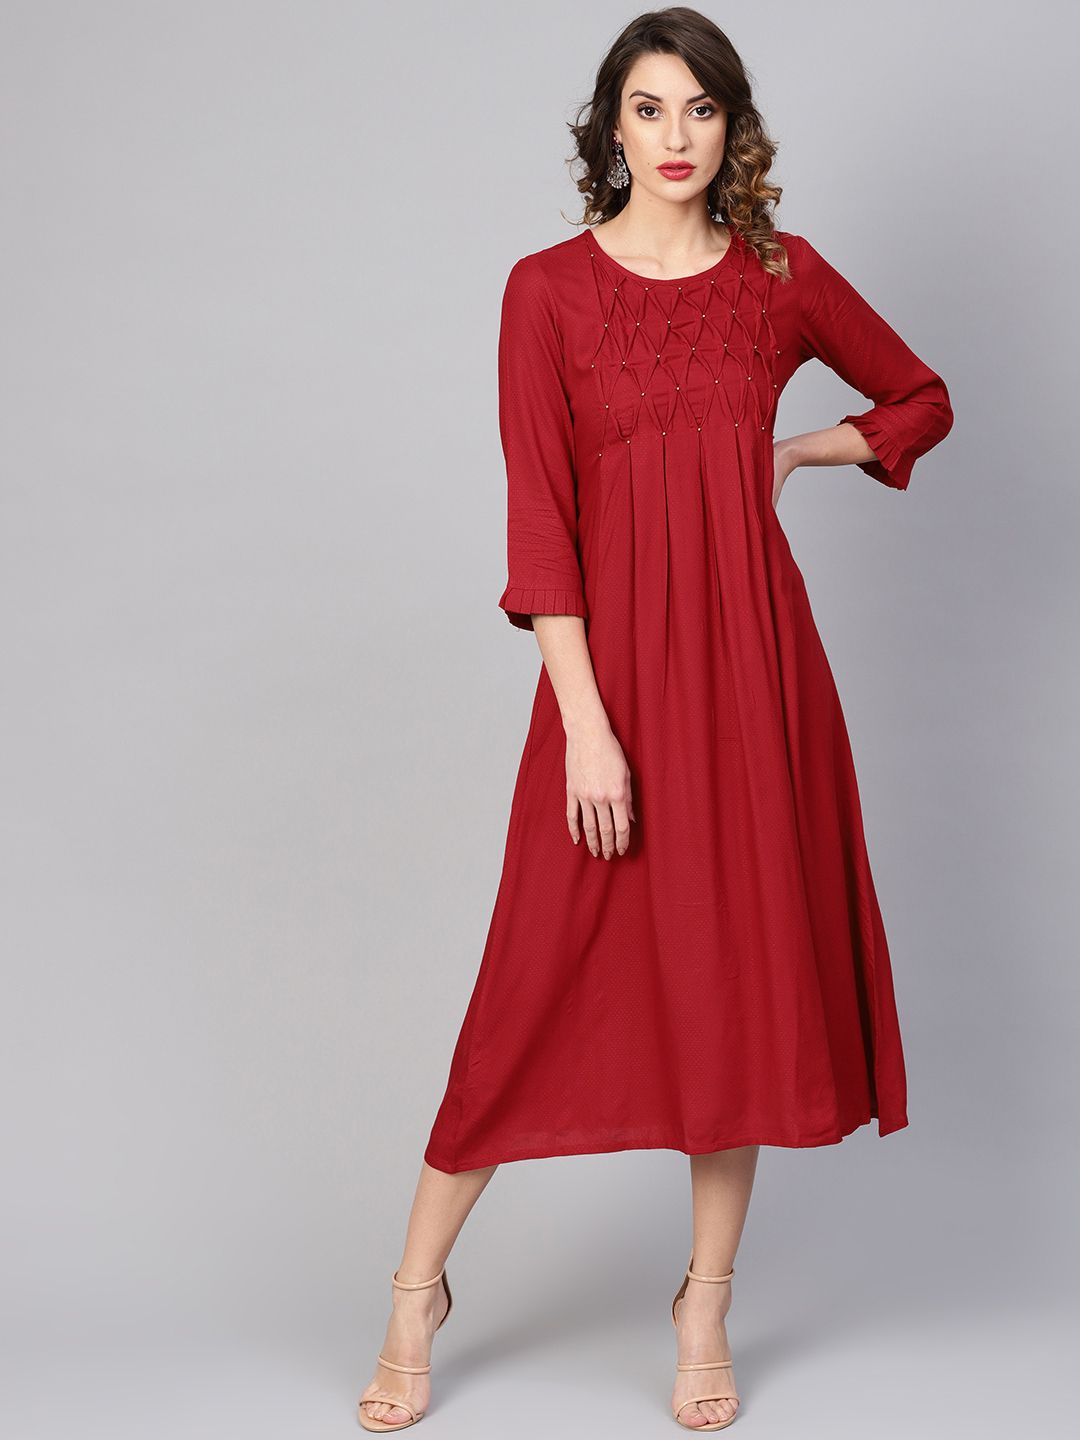 YASH GALLERY Women Self Design Maroon A-Line Dress Price in India